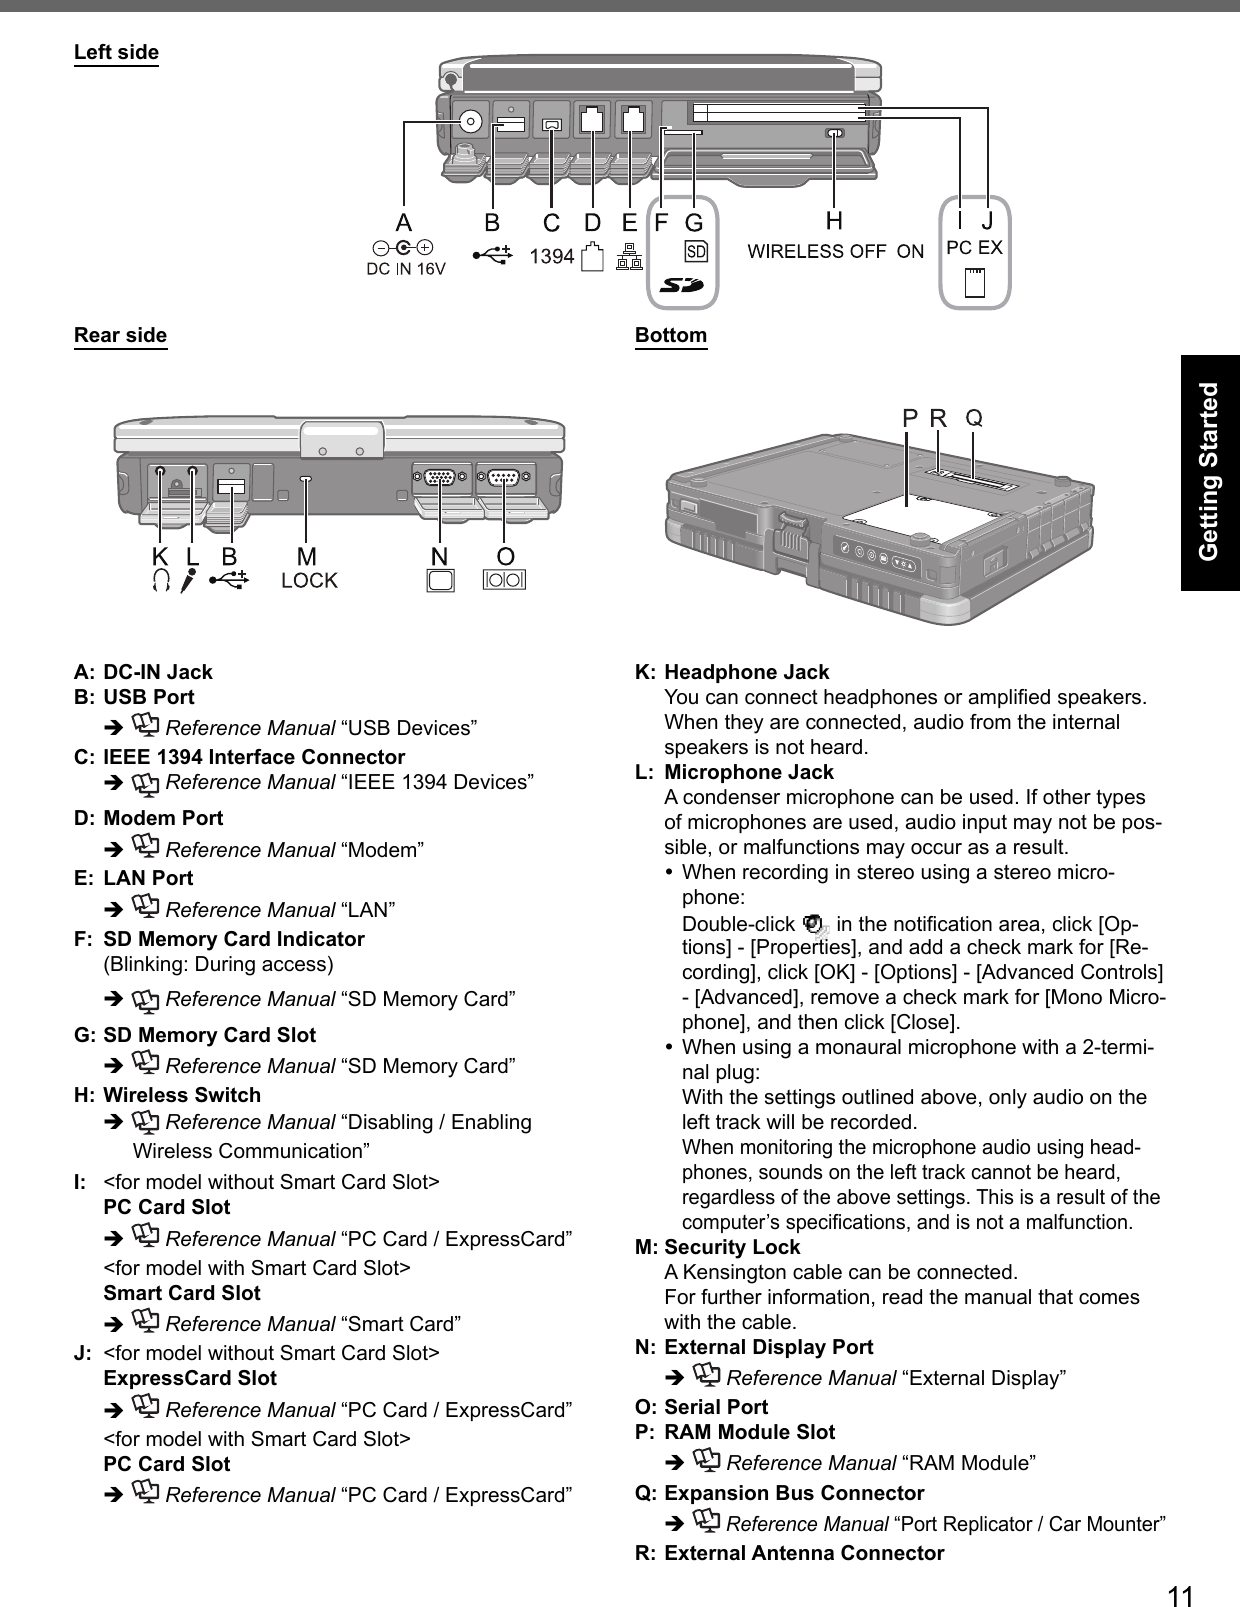 11Getting StartedLeft sideRear side BottomA: DC-IN JackB: USB Port   Reference Manual “USB Devices”C: IEEE 1394 Interface Connector   Reference Manual “IEEE 1394 Devices”D: Modem Port   Reference Manual “Modem”E: LAN Port   Reference Manual “LAN”F:  SD Memory Card Indicator(Blinking: During access)   Reference Manual “SD Memory Card”G: SD Memory Card Slot   Reference Manual “SD Memory Card”H: Wireless Switch   Reference Manual “Disabling / Enabling Wireless Communication”I:  &lt;for model without Smart Card Slot&gt;  PC Card Slot   Reference Manual “PC Card / ExpressCard” &lt;for model with Smart Card Slot&gt;  Smart Card Slot   Reference Manual “Smart Card”J:  &lt;for model without Smart Card Slot&gt; ExpressCard Slot   Reference Manual “PC Card / ExpressCard” &lt;for model with Smart Card Slot&gt;  PC Card Slot   Reference Manual “PC Card / ExpressCard”K: Headphone Jack  You can connect headphones or ampliﬁ ed speakers. When they are connected, audio from the internal speakers is not heard.L: Microphone Jack  A condenser microphone can be used. If other types of microphones are used, audio input may not be pos-sible, or malfunctions may occur as a result. When recording in stereo using a stereo micro-phone:Double-click   in the notiﬁ cation area, click [Op-tions] - [Properties], and add a check mark for [Re-cording], click [OK] - [Options] - [Advanced Controls] - [Advanced], remove a check mark for [Mono Micro-phone], and then click [Close]. When using a monaural microphone with a 2-termi-nal plug:With the settings outlined above, only audio on the left track will be recorded.When monitoring the microphone audio using head-phones, sounds on the left track cannot be heard, regardless of the above settings. This is a result of the computer’s speciﬁ cations, and is not a malfunction.M: Security Lock  A Kensington cable can be connected.  For further information, read the manual that comes with the cable.N: External Display Port   Reference Manual “External Display”O: Serial PortP:  RAM Module Slot   Reference Manual “RAM Module”Q: Expansion Bus Connector   Reference Manual “Port Replicator / Car Mounter”R: External Antenna Connector